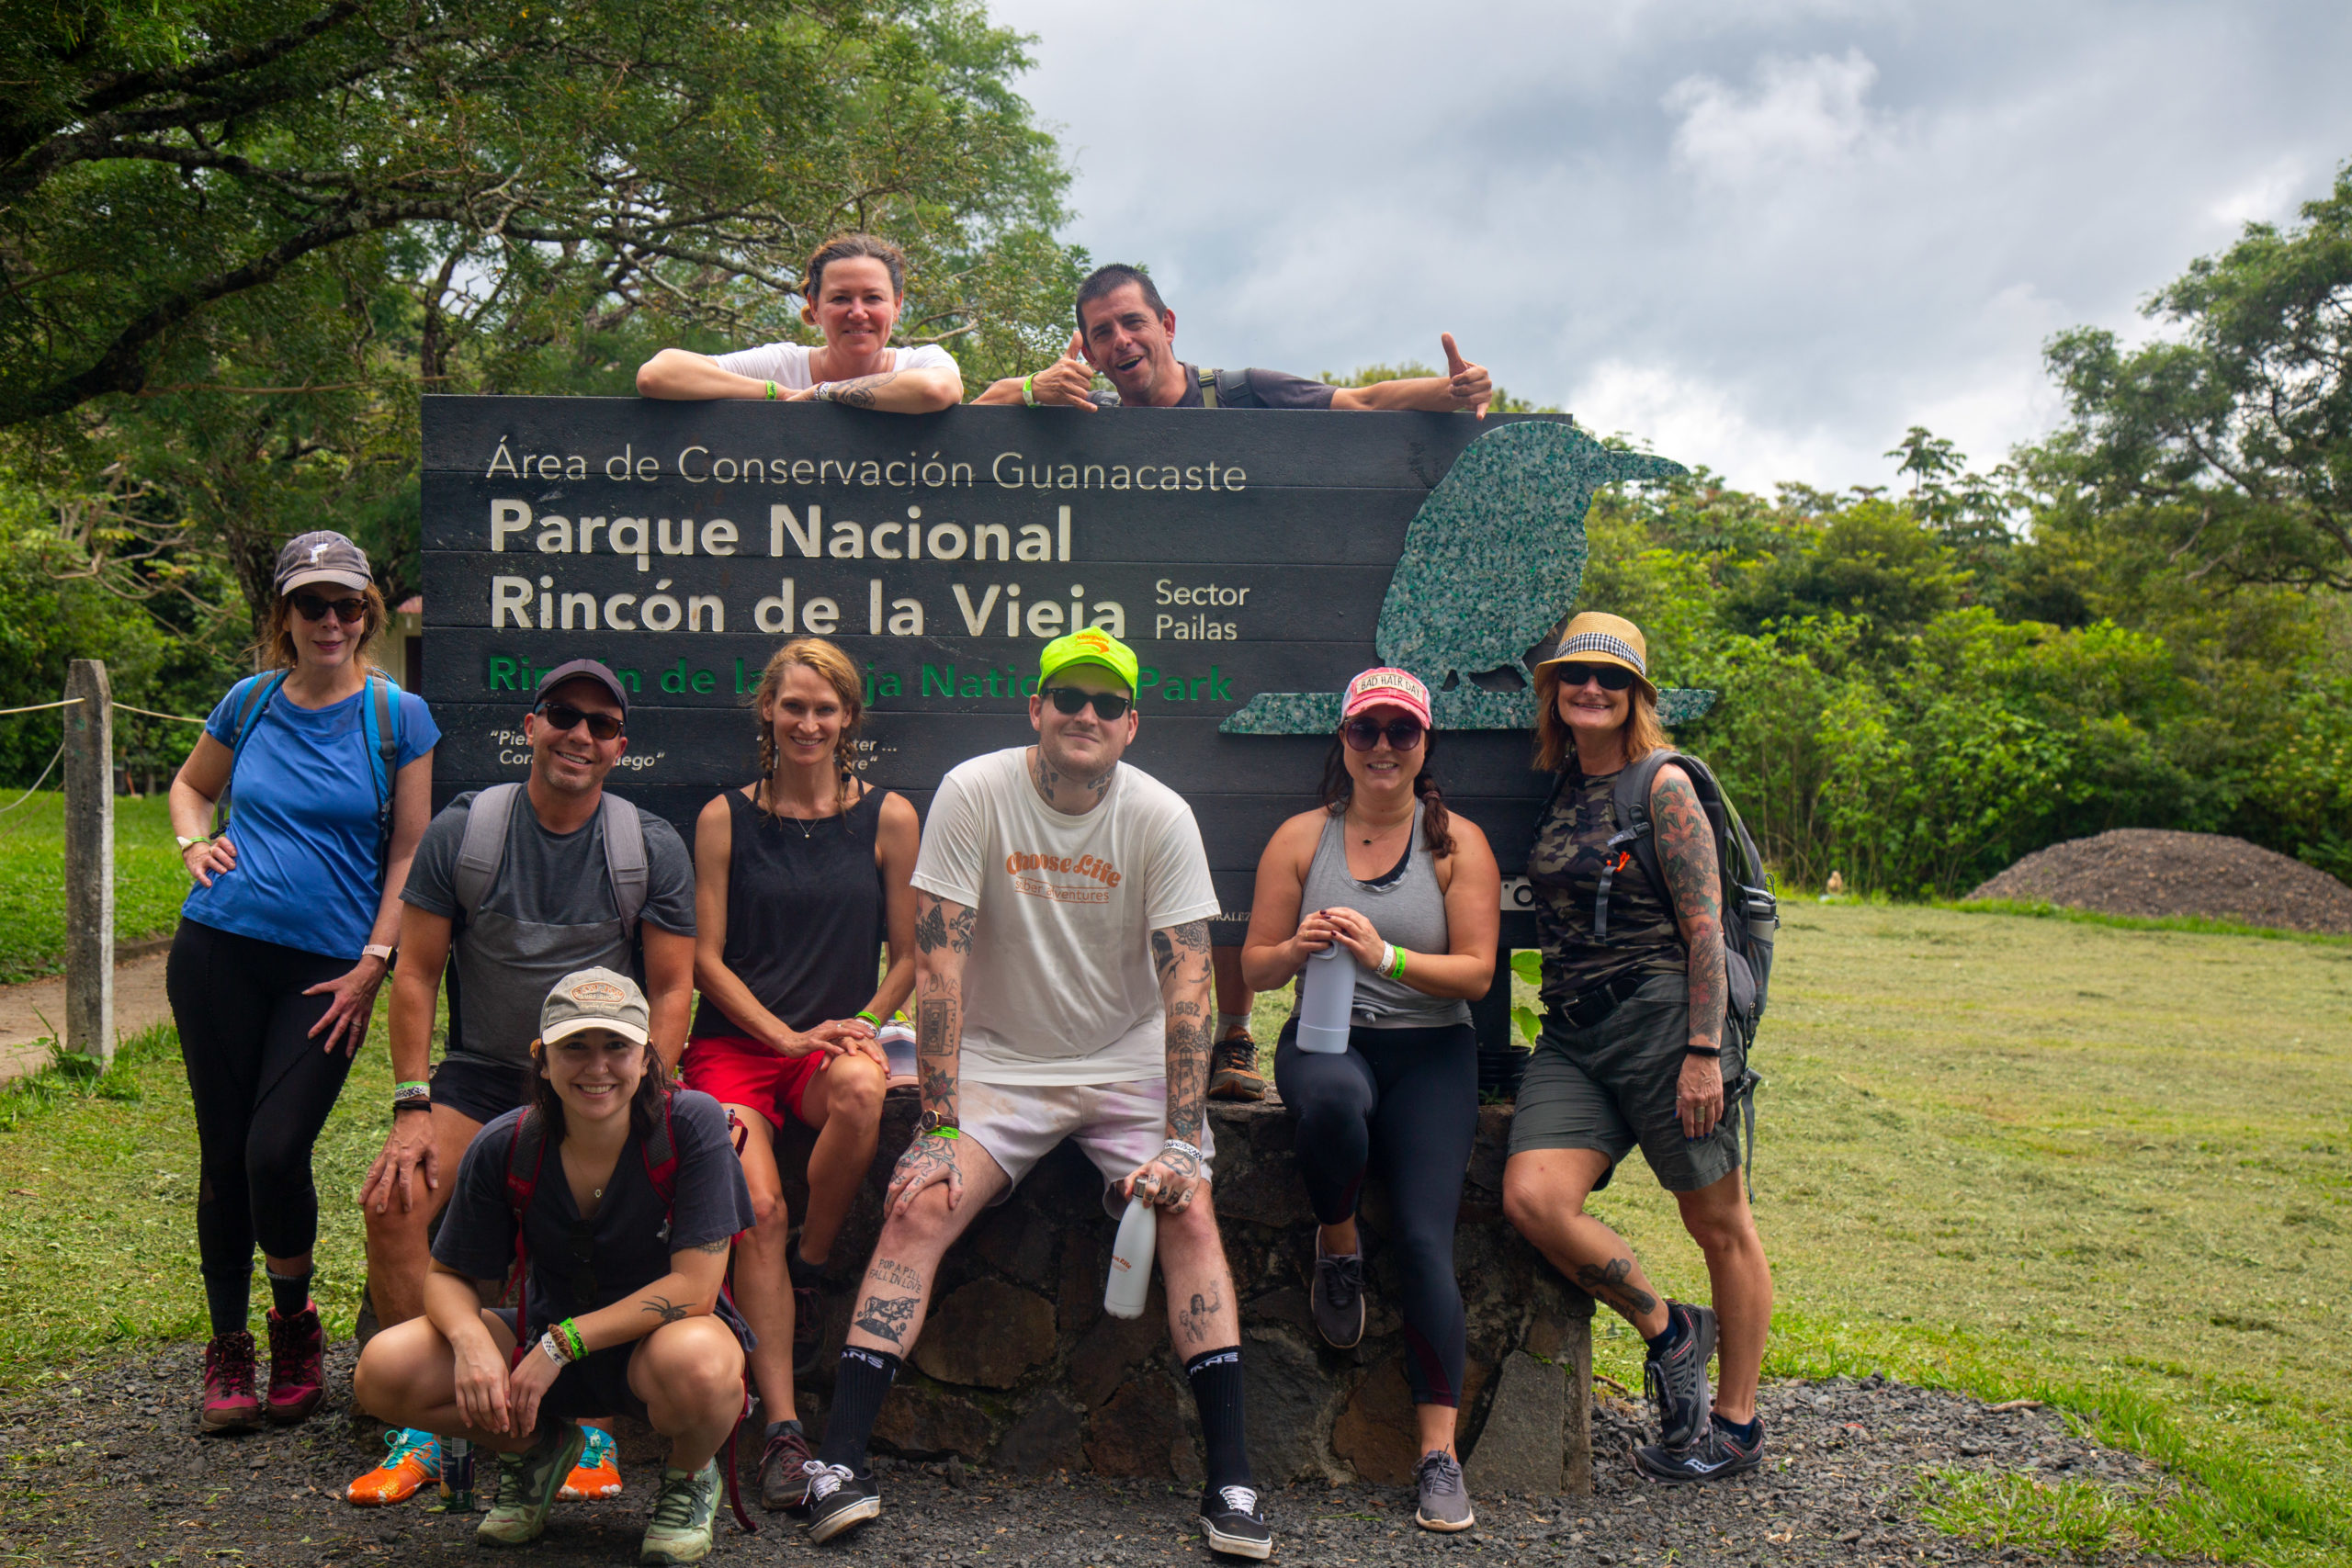 Sober travelers pose in front of the Rincon de la Vieia National Park sign.